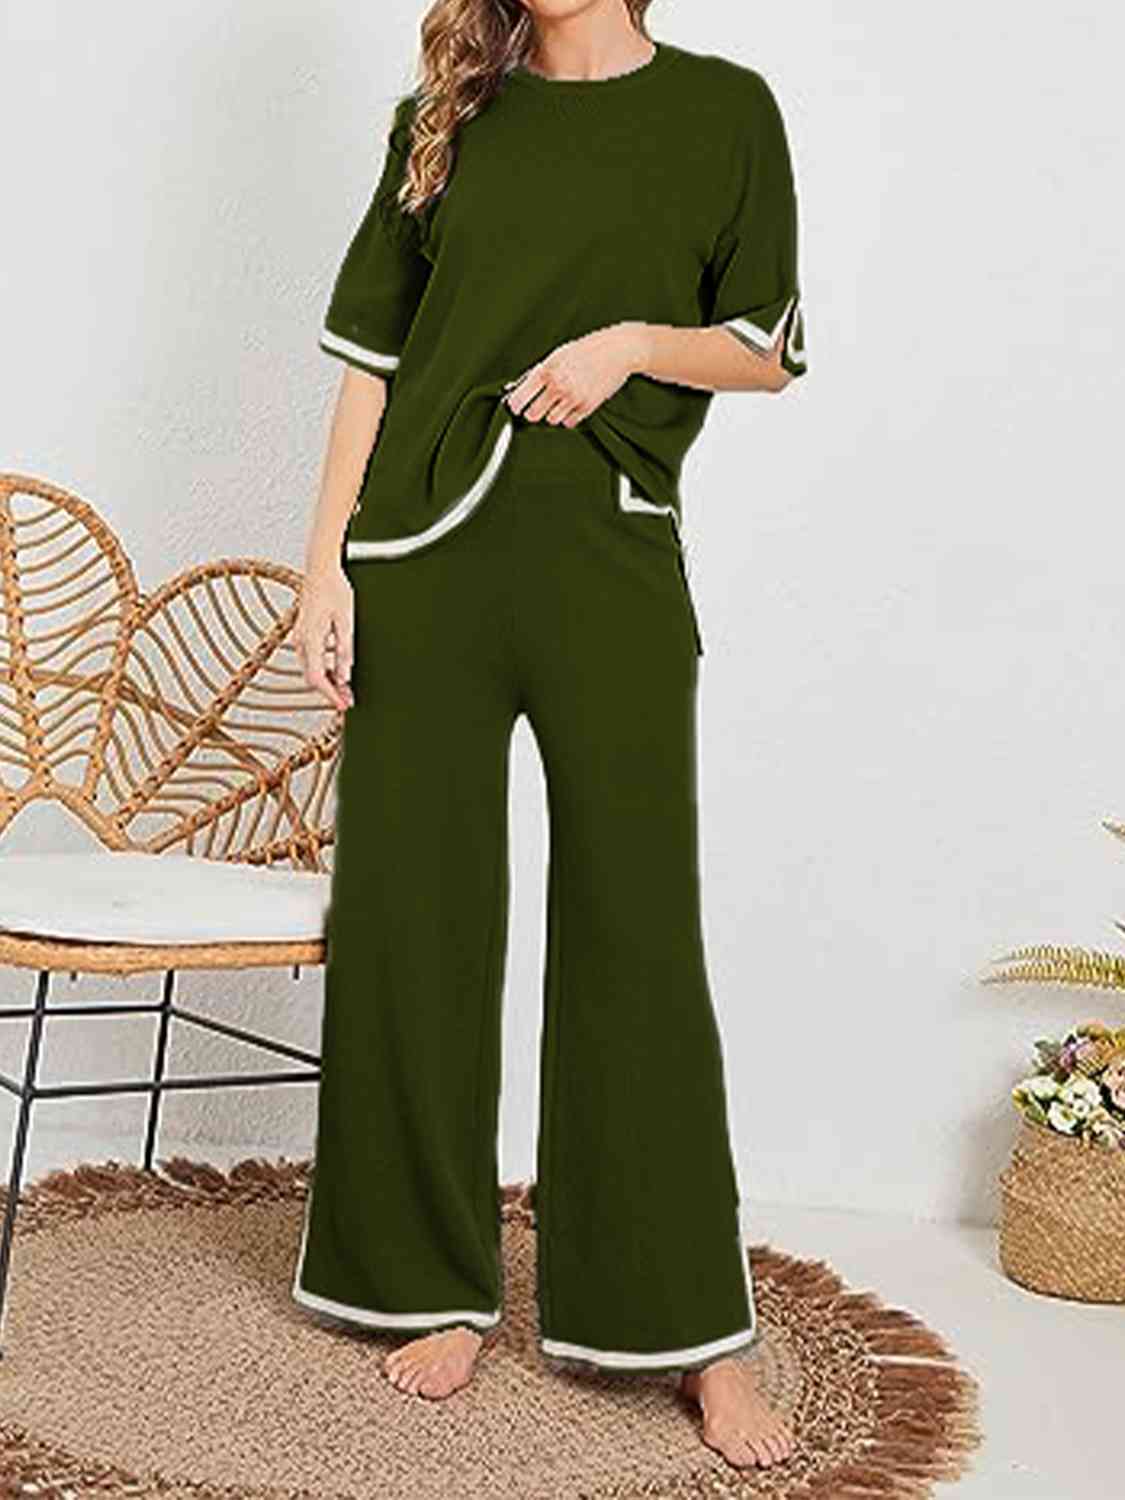 Women's Contrast High-Low Sweater and Knit Pants Set Army Green